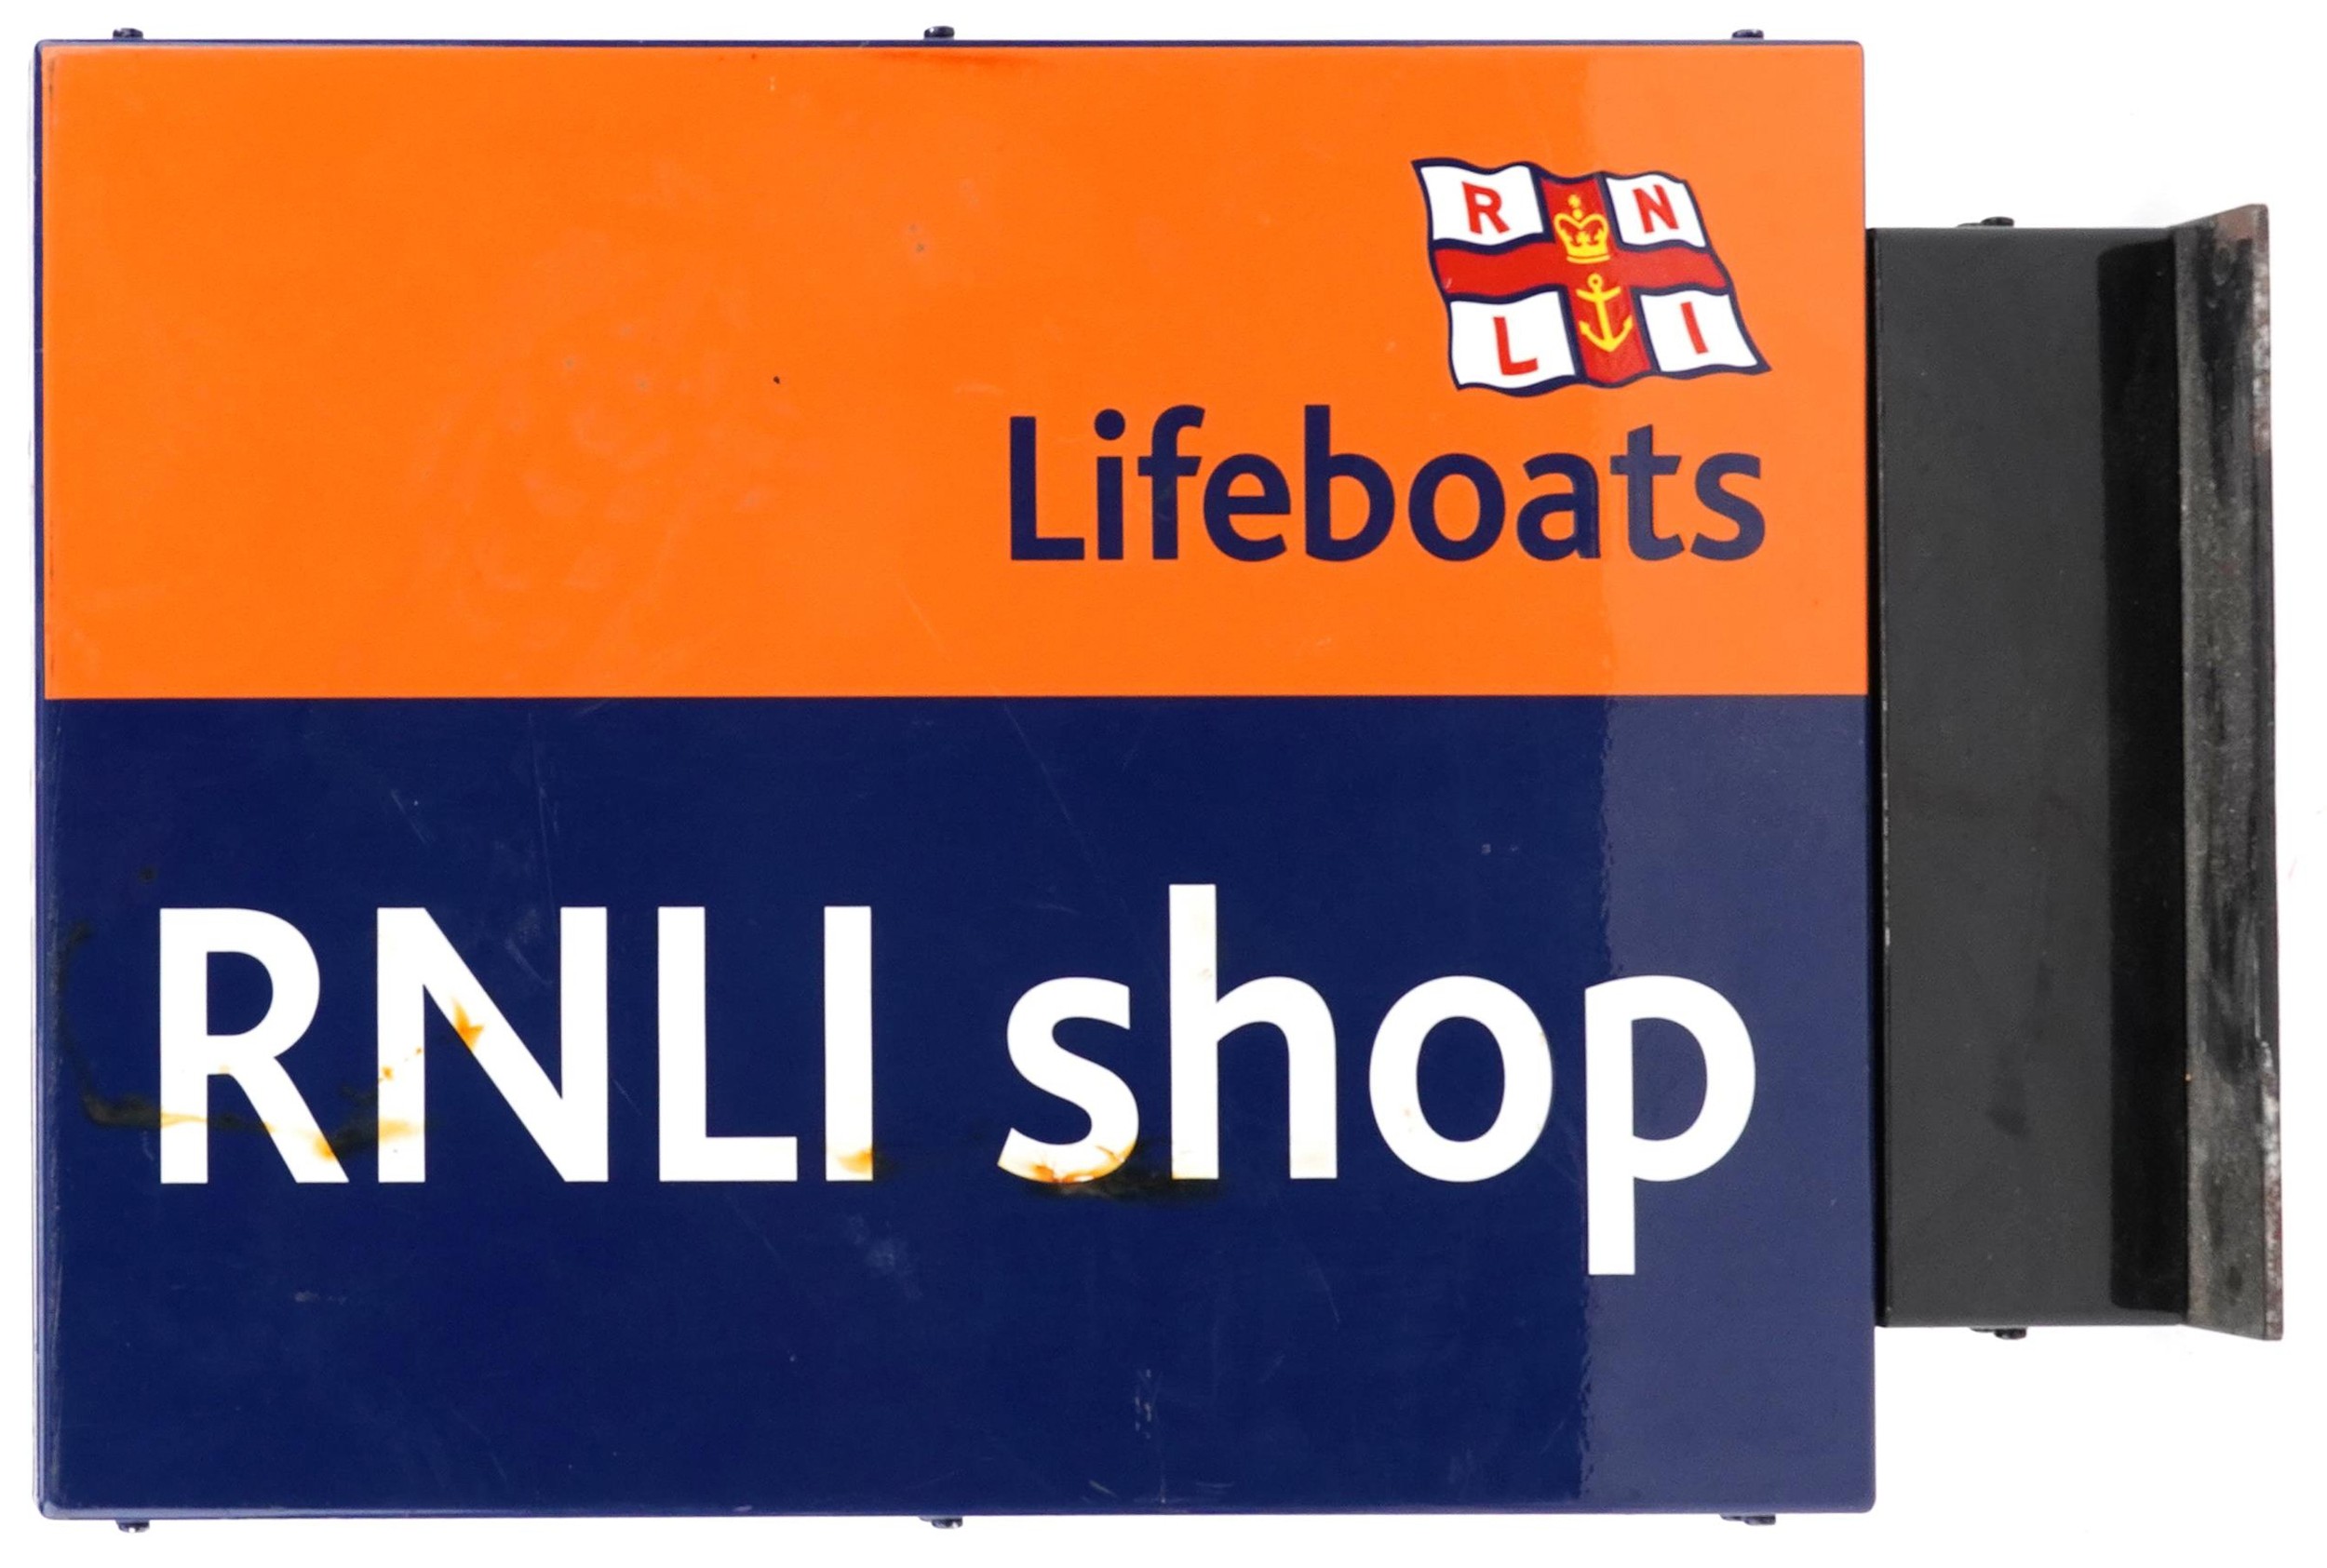 Royal National Lifeboat Association RNLI Shop double sided metal advertising sign, 65cm x 41.5cm